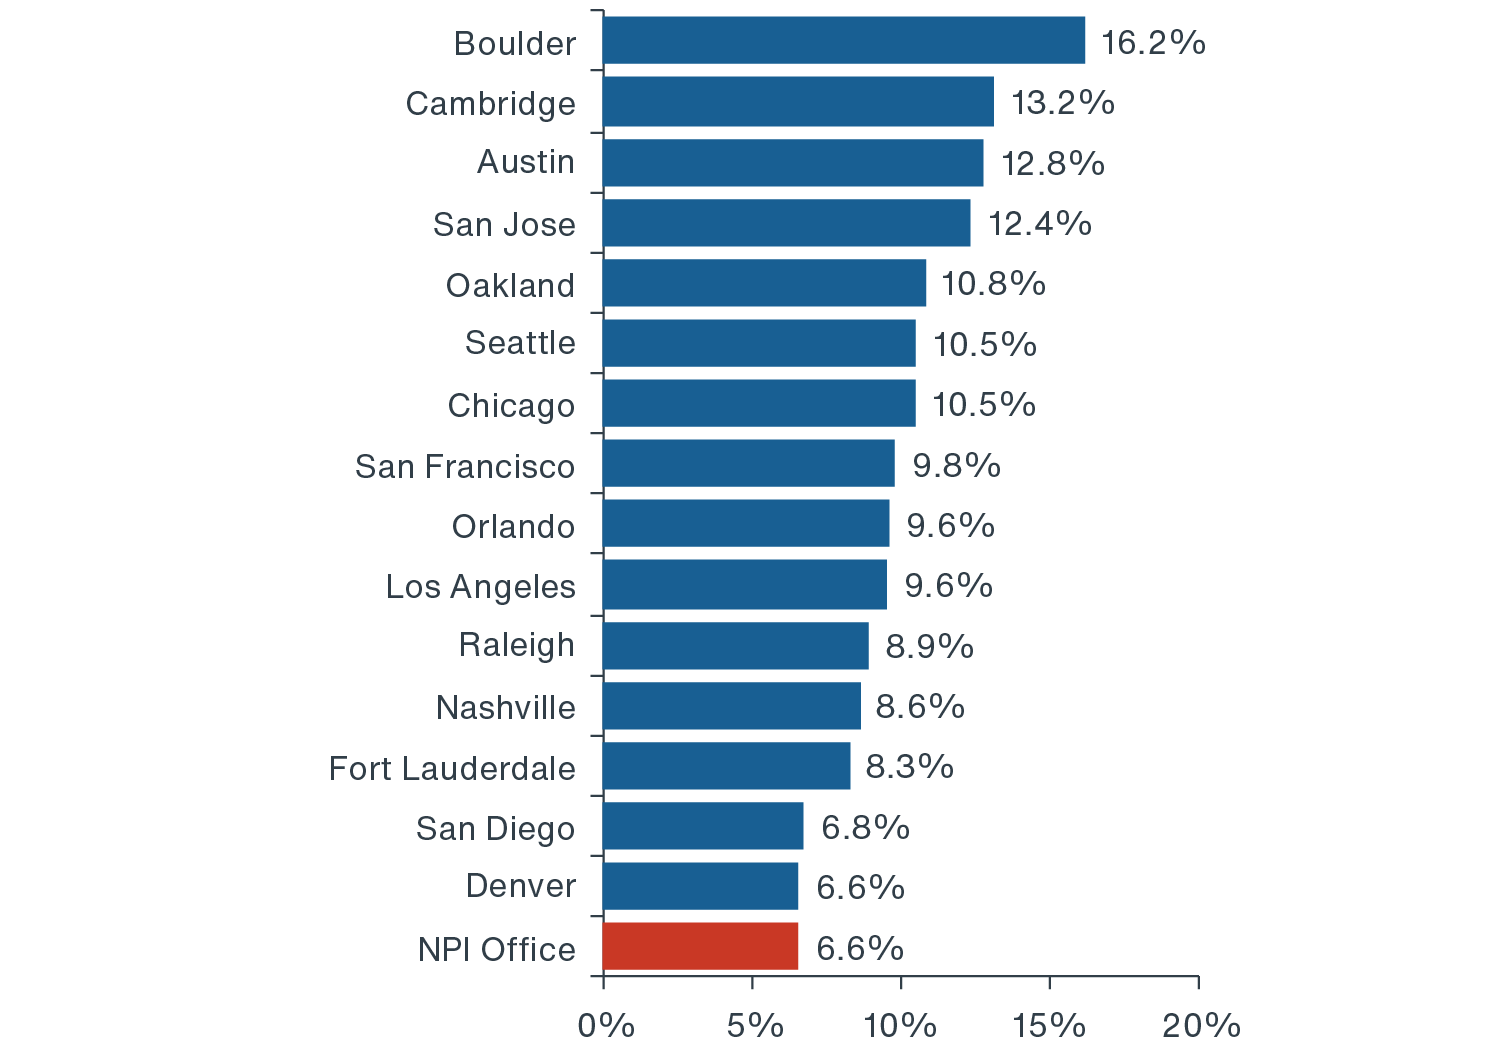 Bar chart depicting office returns in top markets of Boulder, Cambridge and Austin